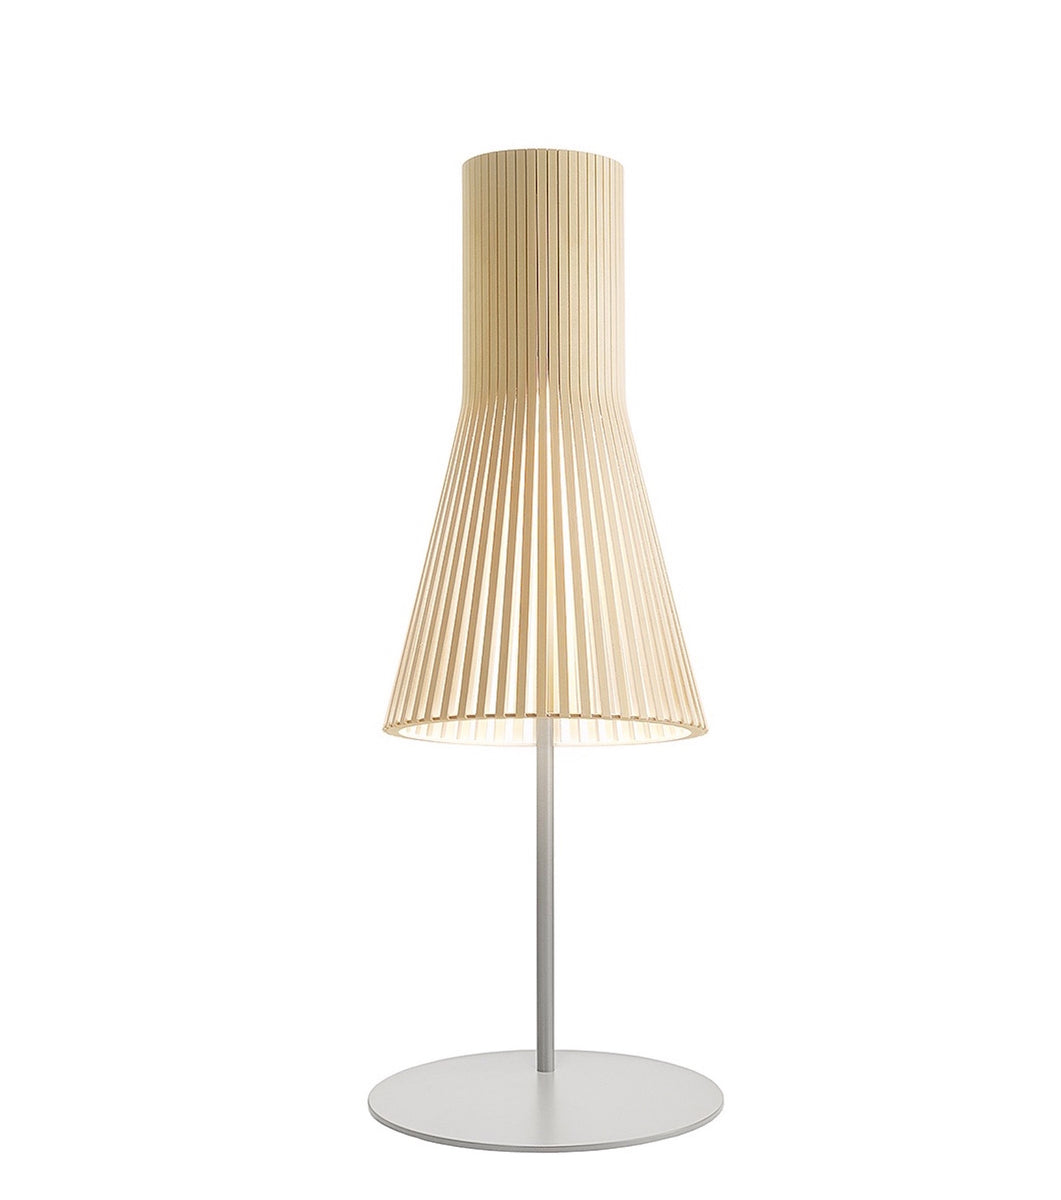 Secto Table light wooden shade 4220 Natural Birch 2